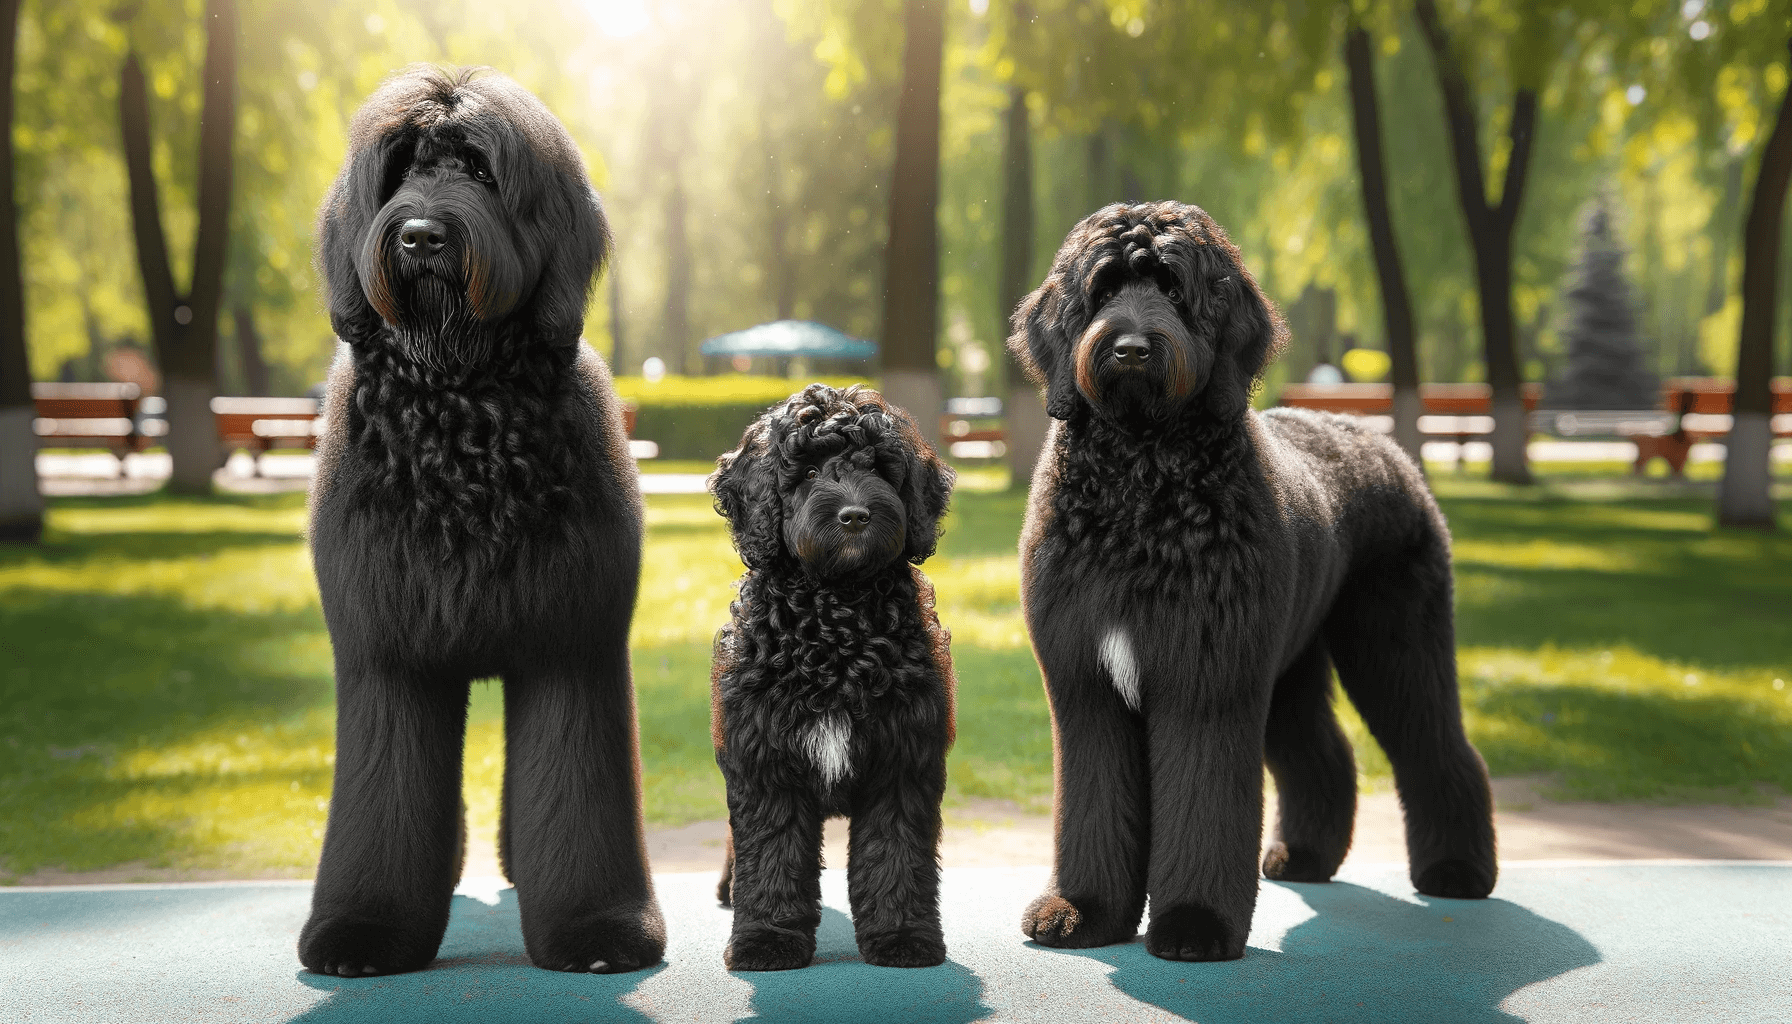 Black Aussiedoodles female and male side by side in a sunny park with the male's robust stature slightly larger and the female more petite